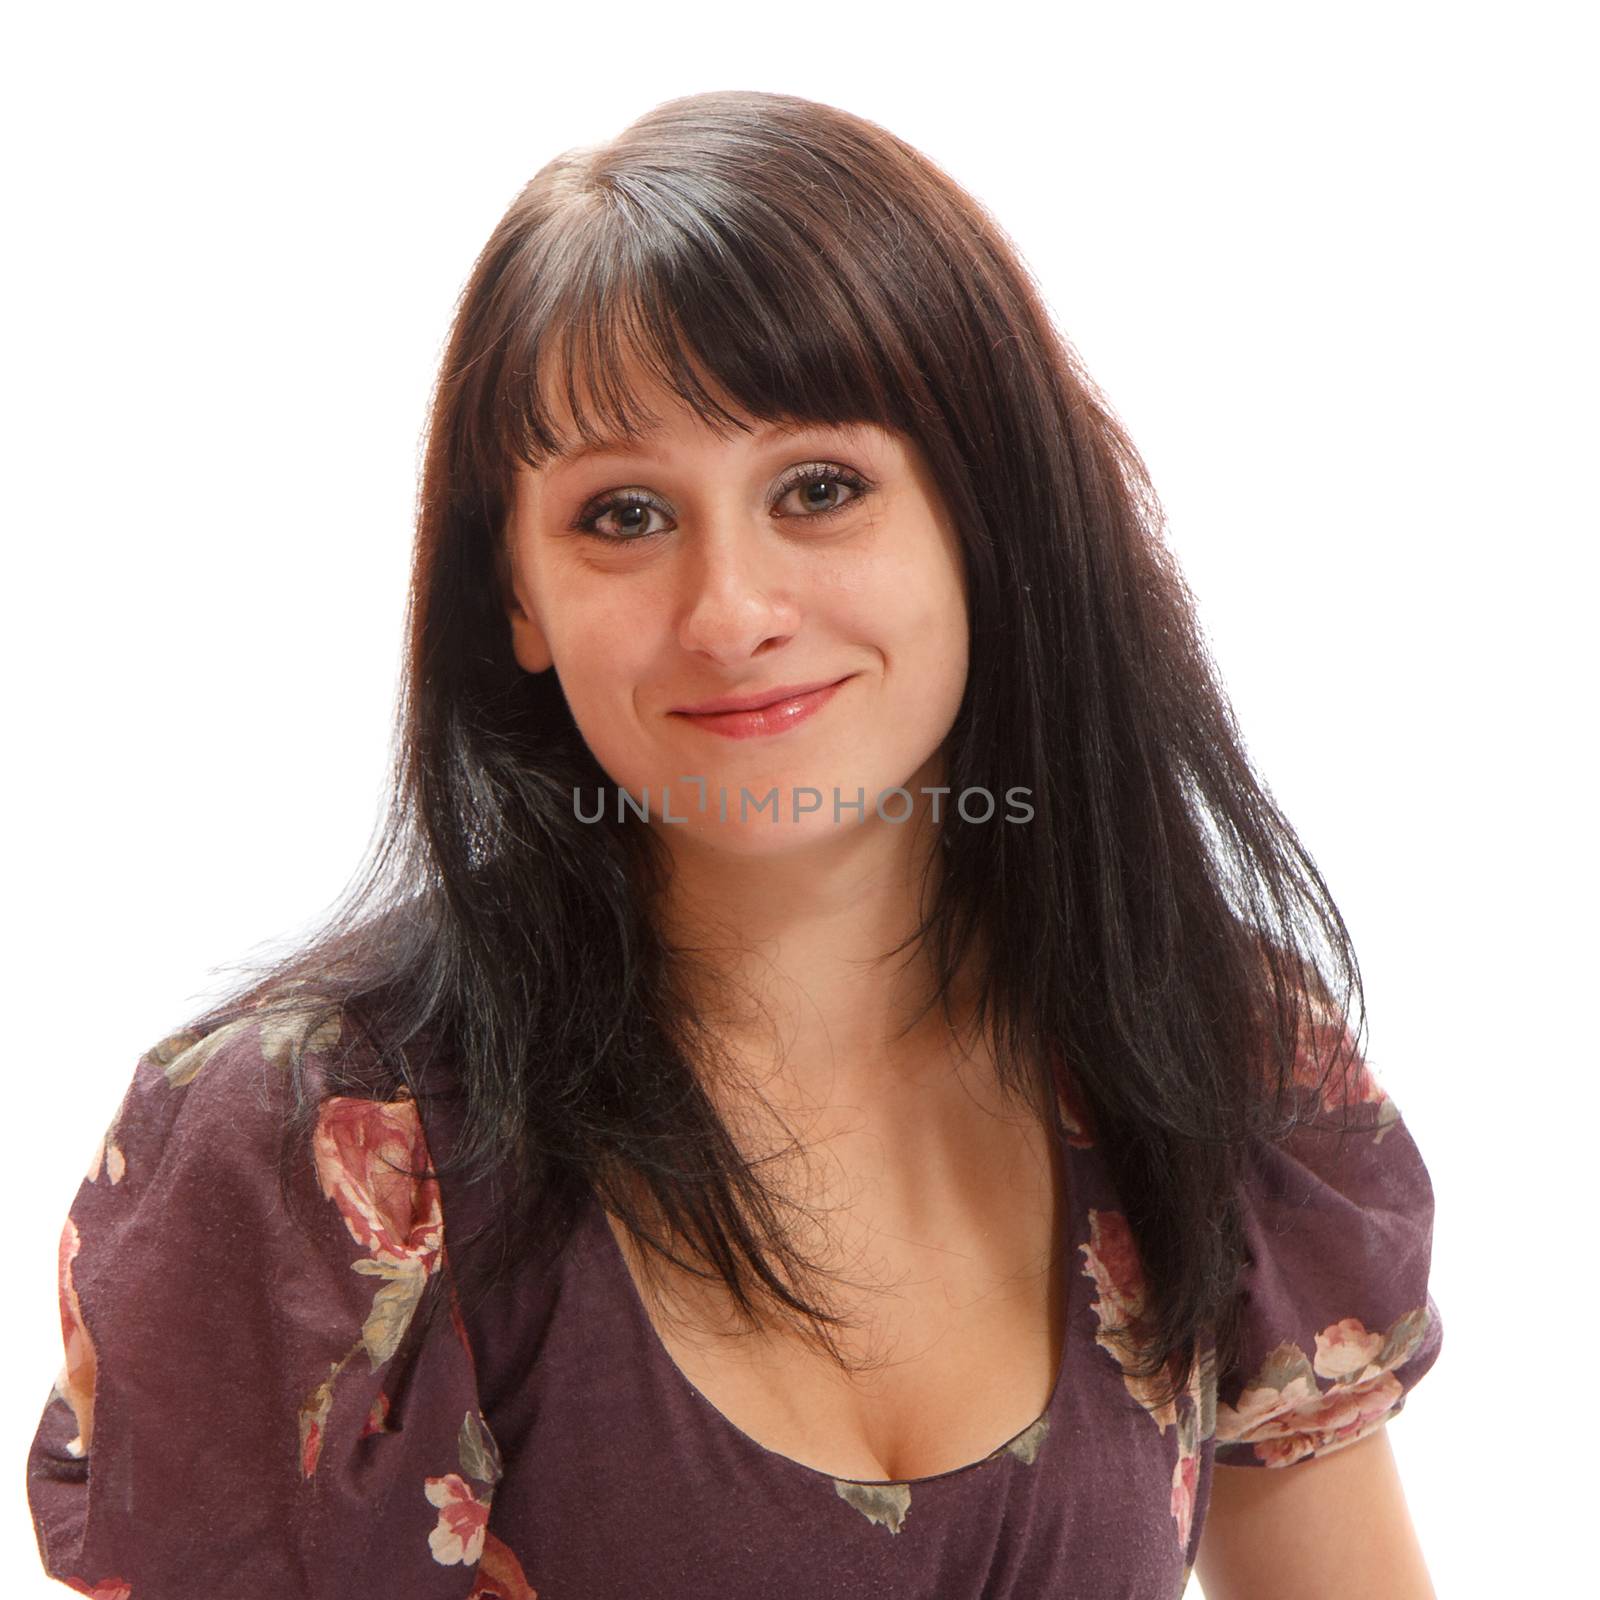 smiling woman portrait on a white background